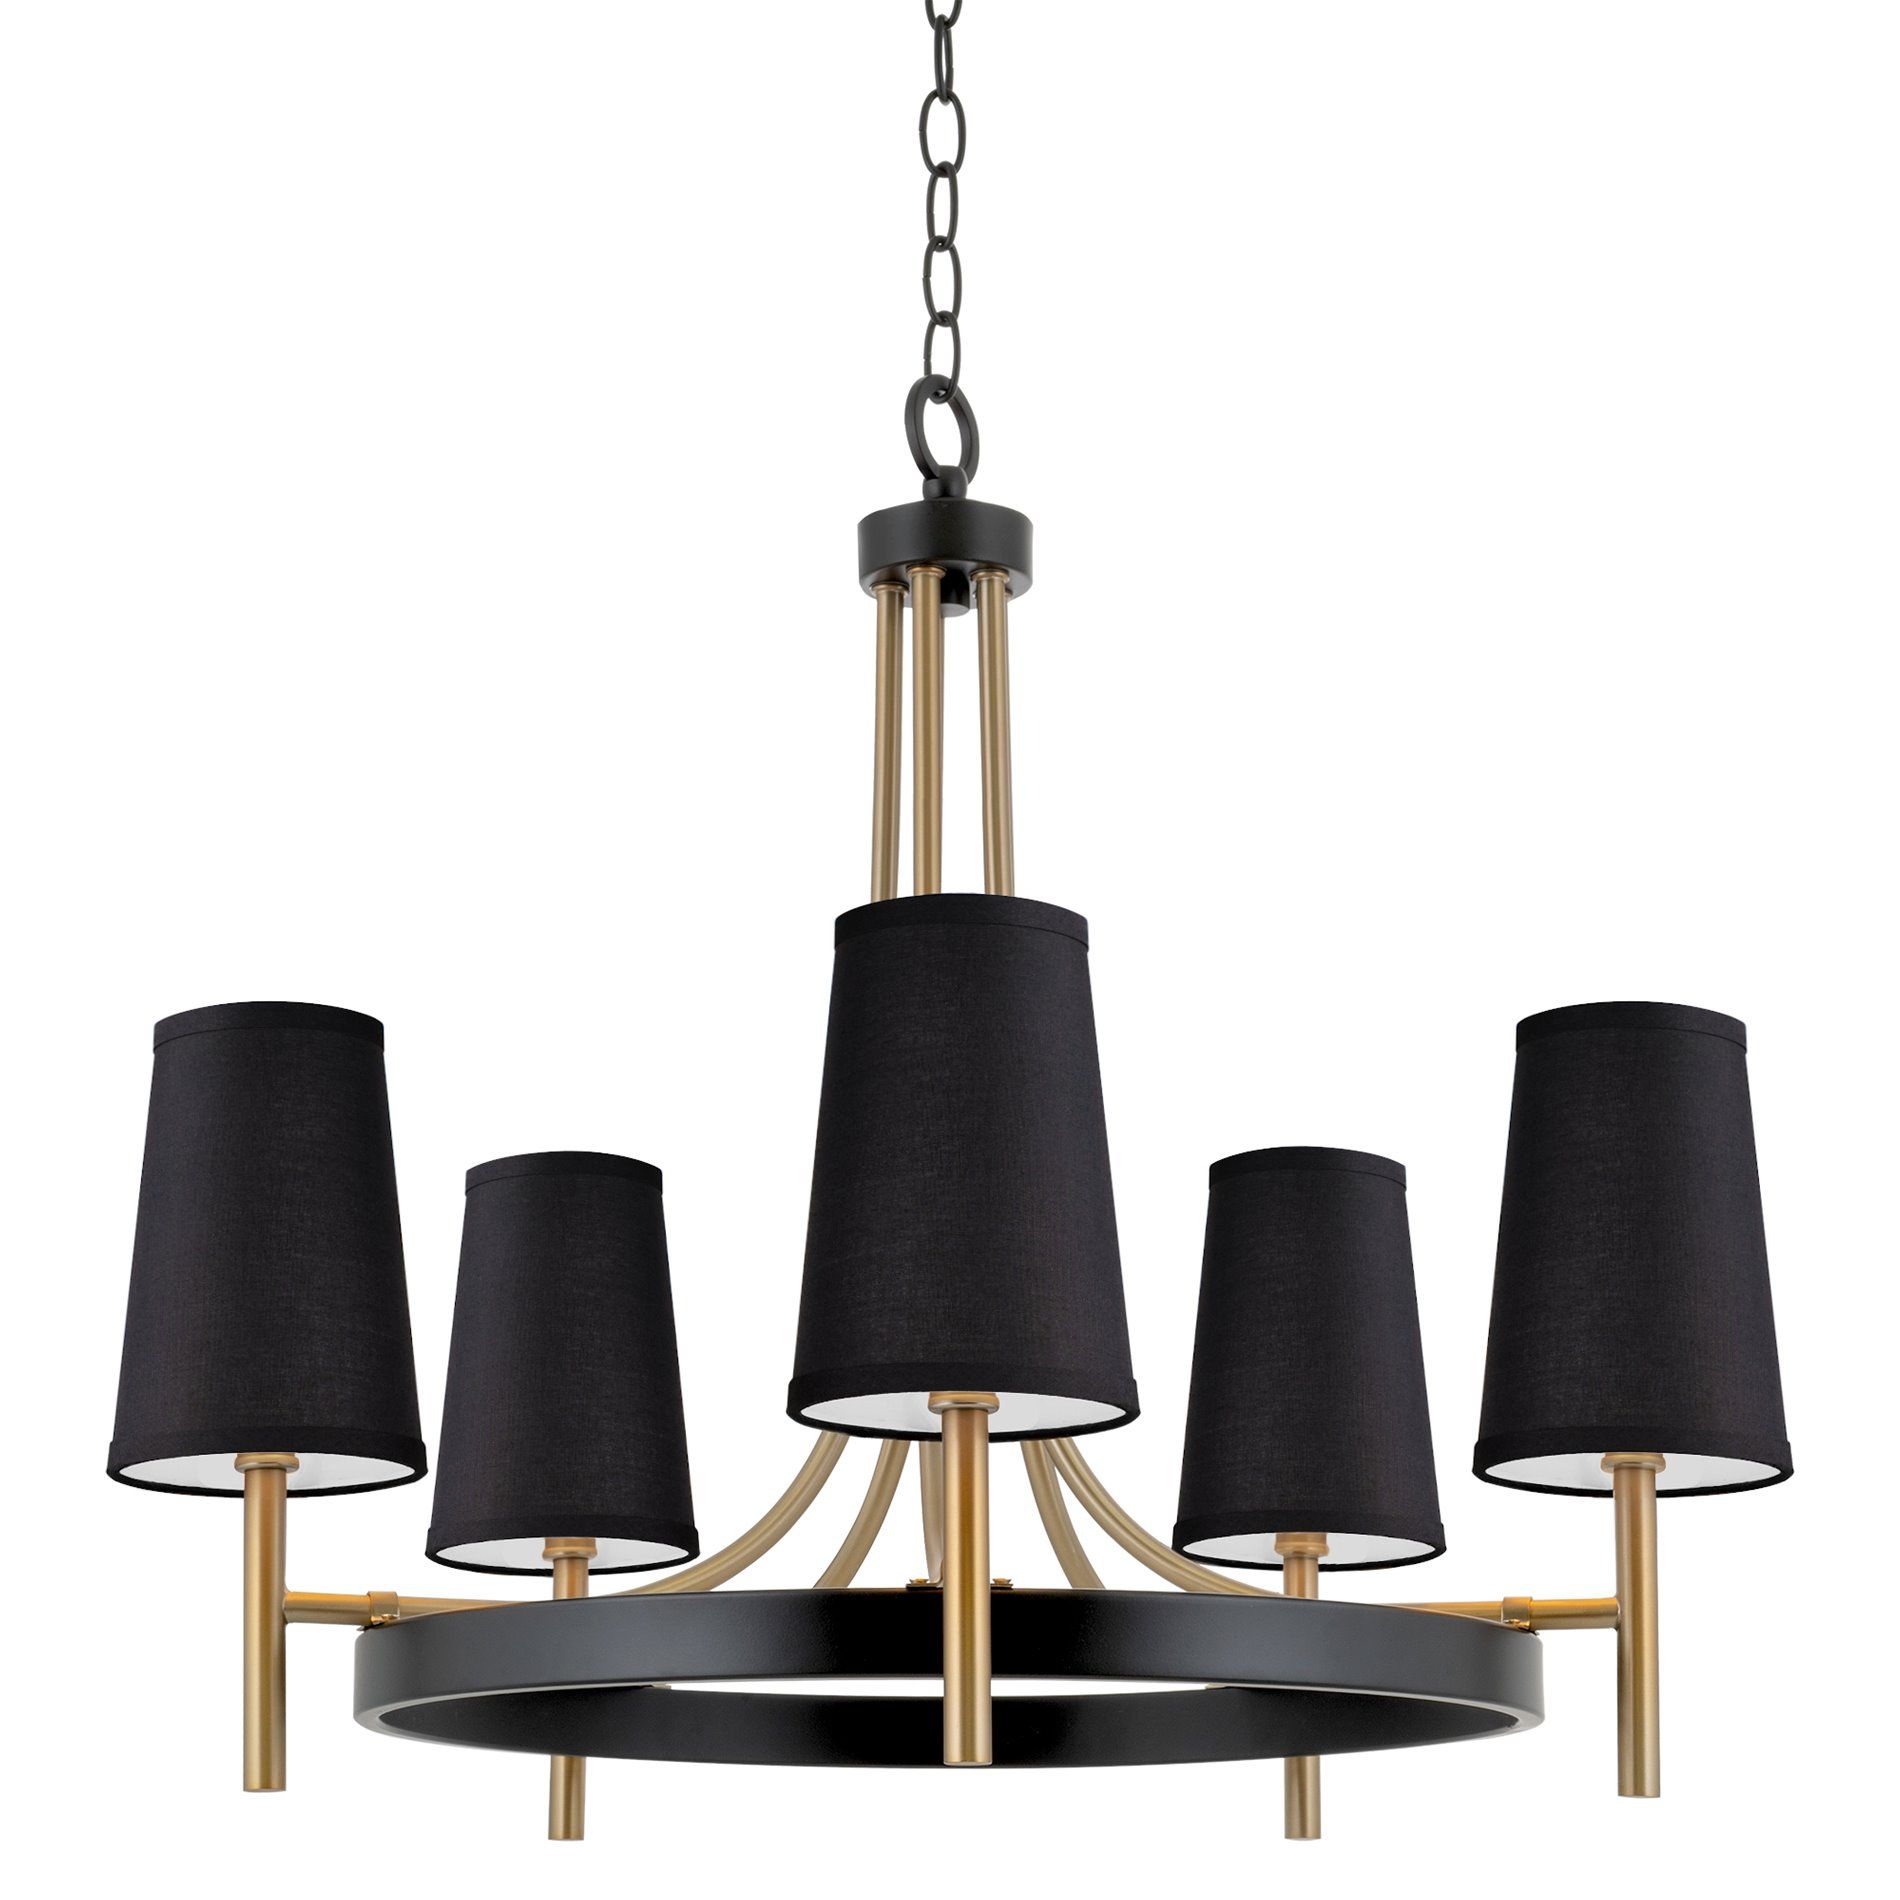 Kira Home Geneva 24" 5 Light Mid Century Modern Round Intended For Brass Wagon Wheel Chandeliers (View 12 of 15)